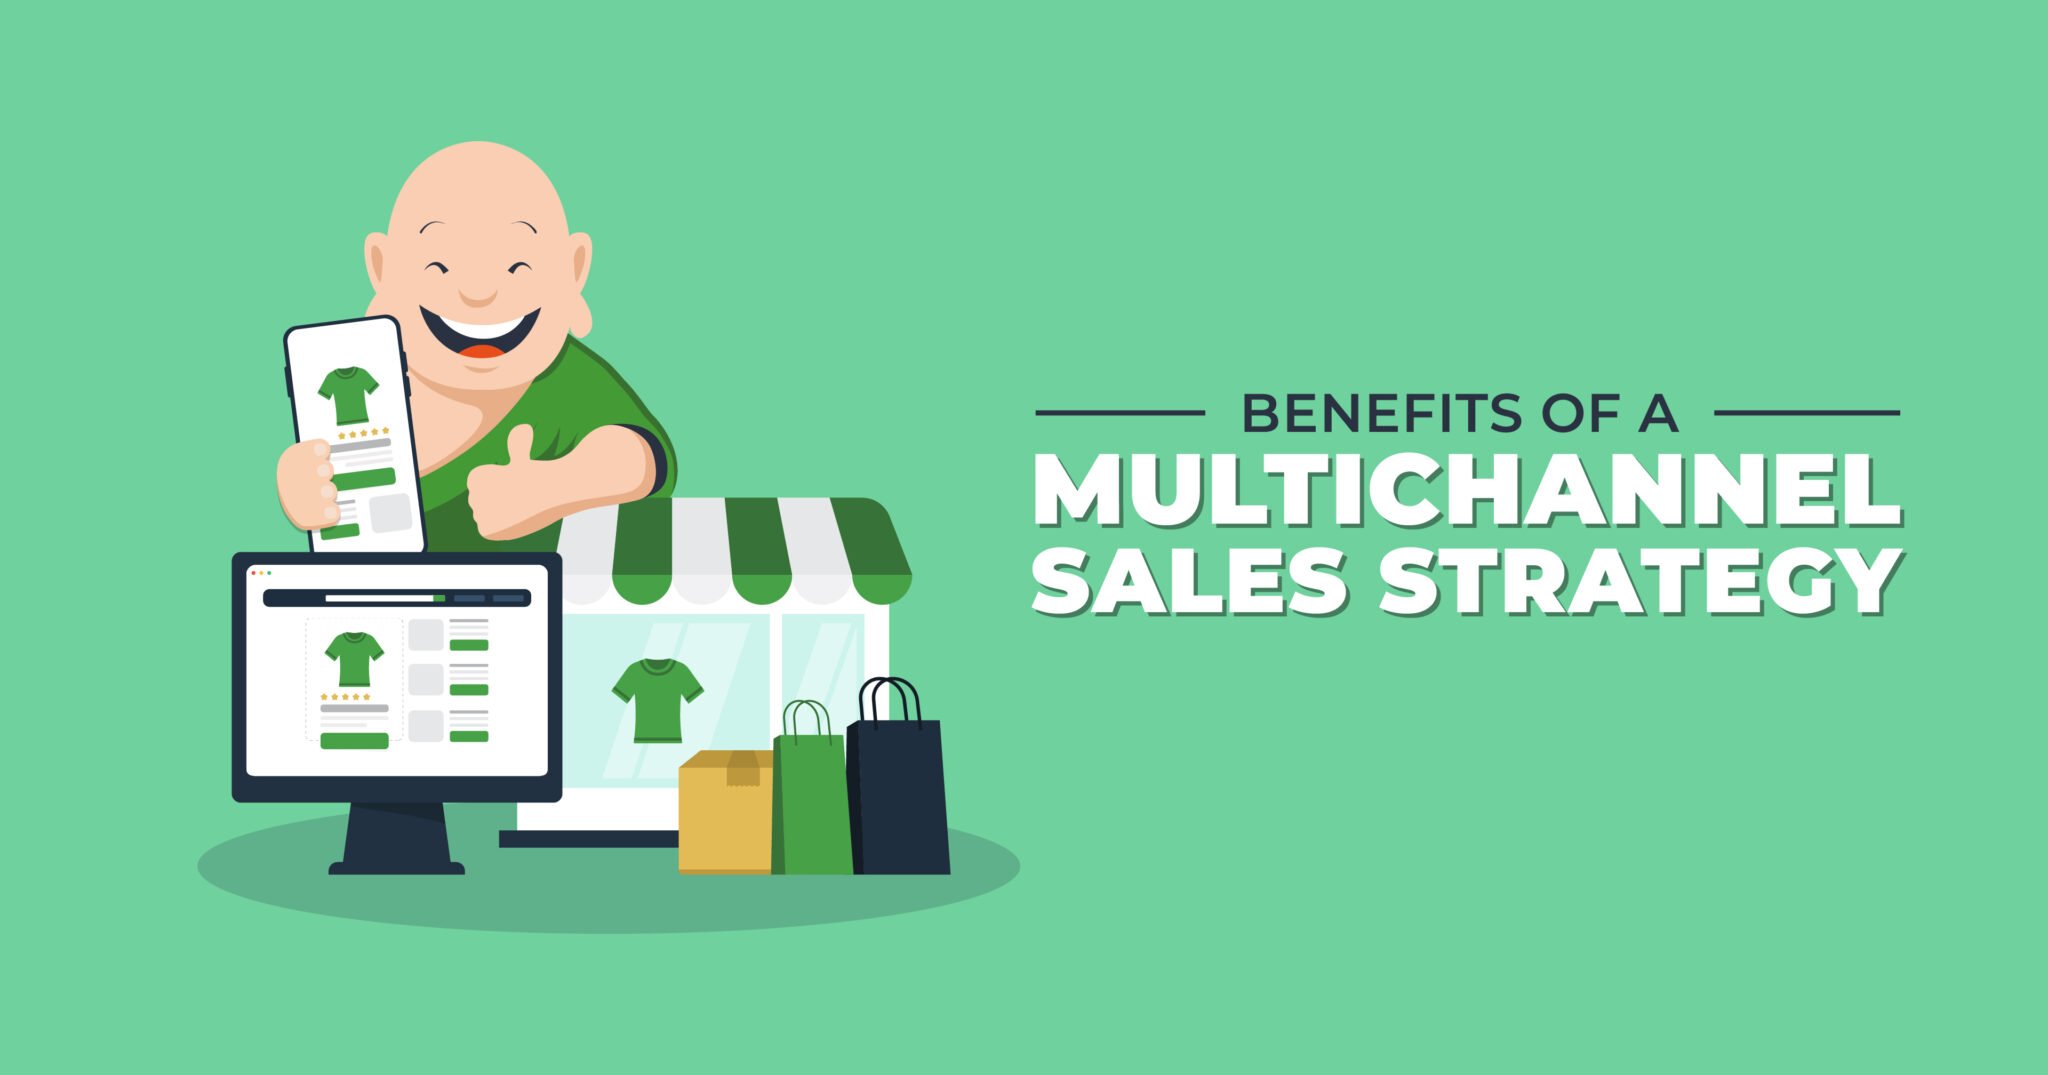 Benefits of a Multichannel Sales Strategy